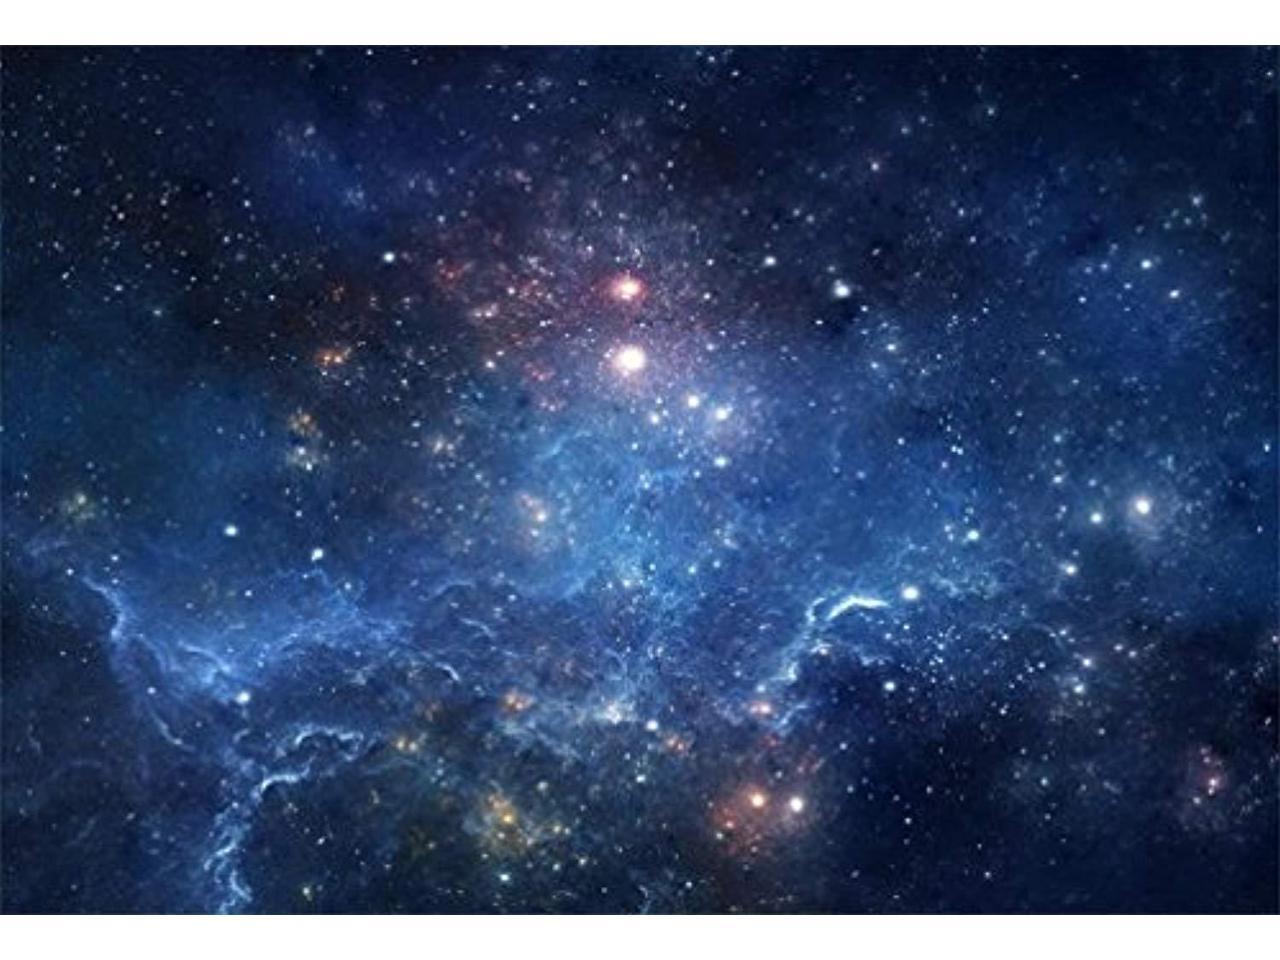 20x10ft Large Vinyl Photography Backdrop Milky Way Panorama The Cosmos Wonders Universe Black Hole Photo Backdrop for Party Film Event Photo Shoot Video Studio Photo Booth Props 